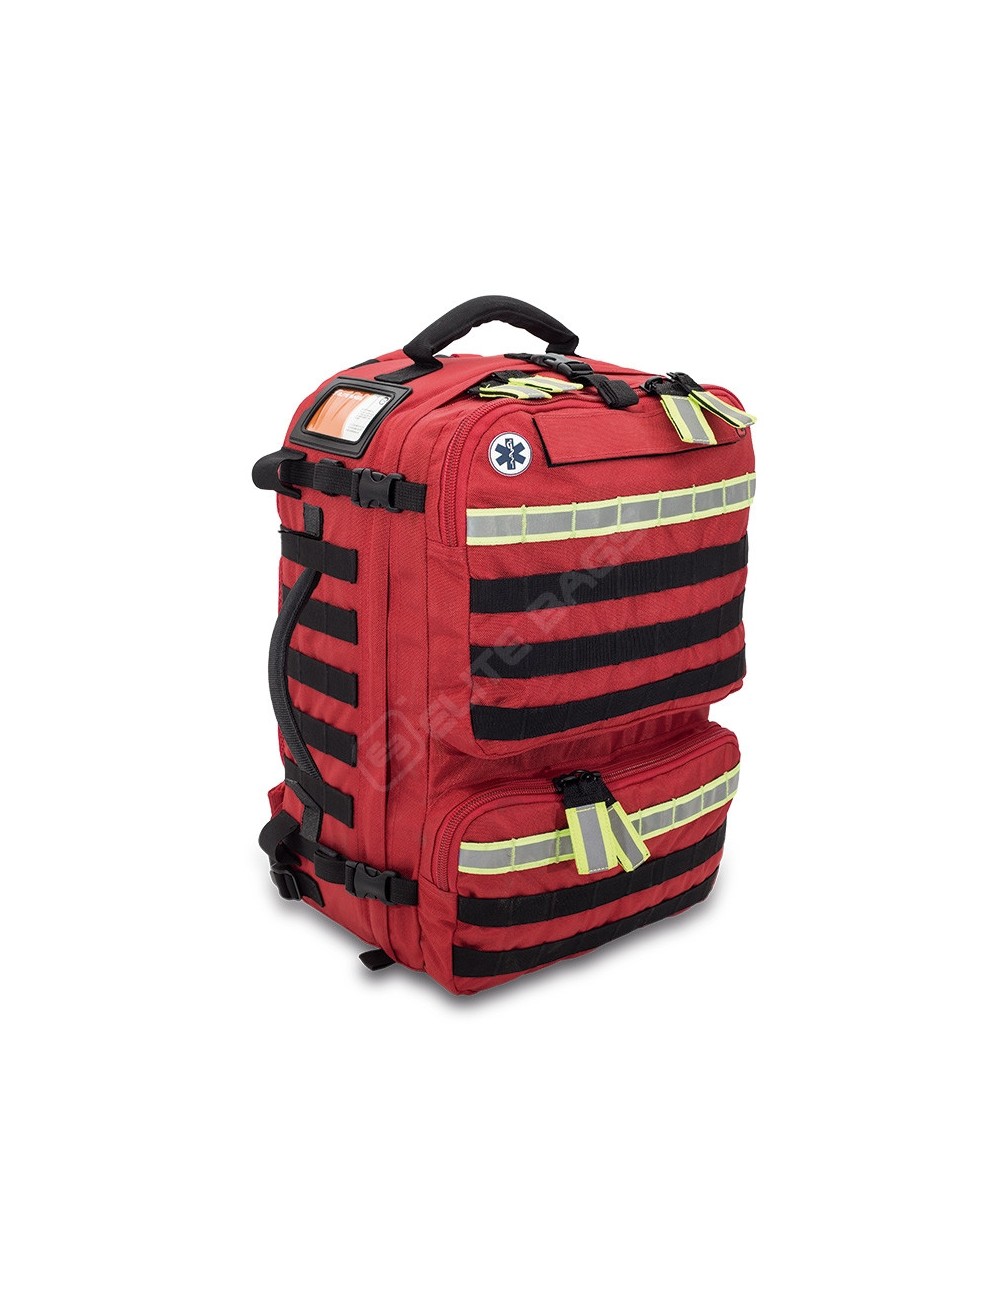 Paramedic Backpack - PARAMED'S - Elite Bags